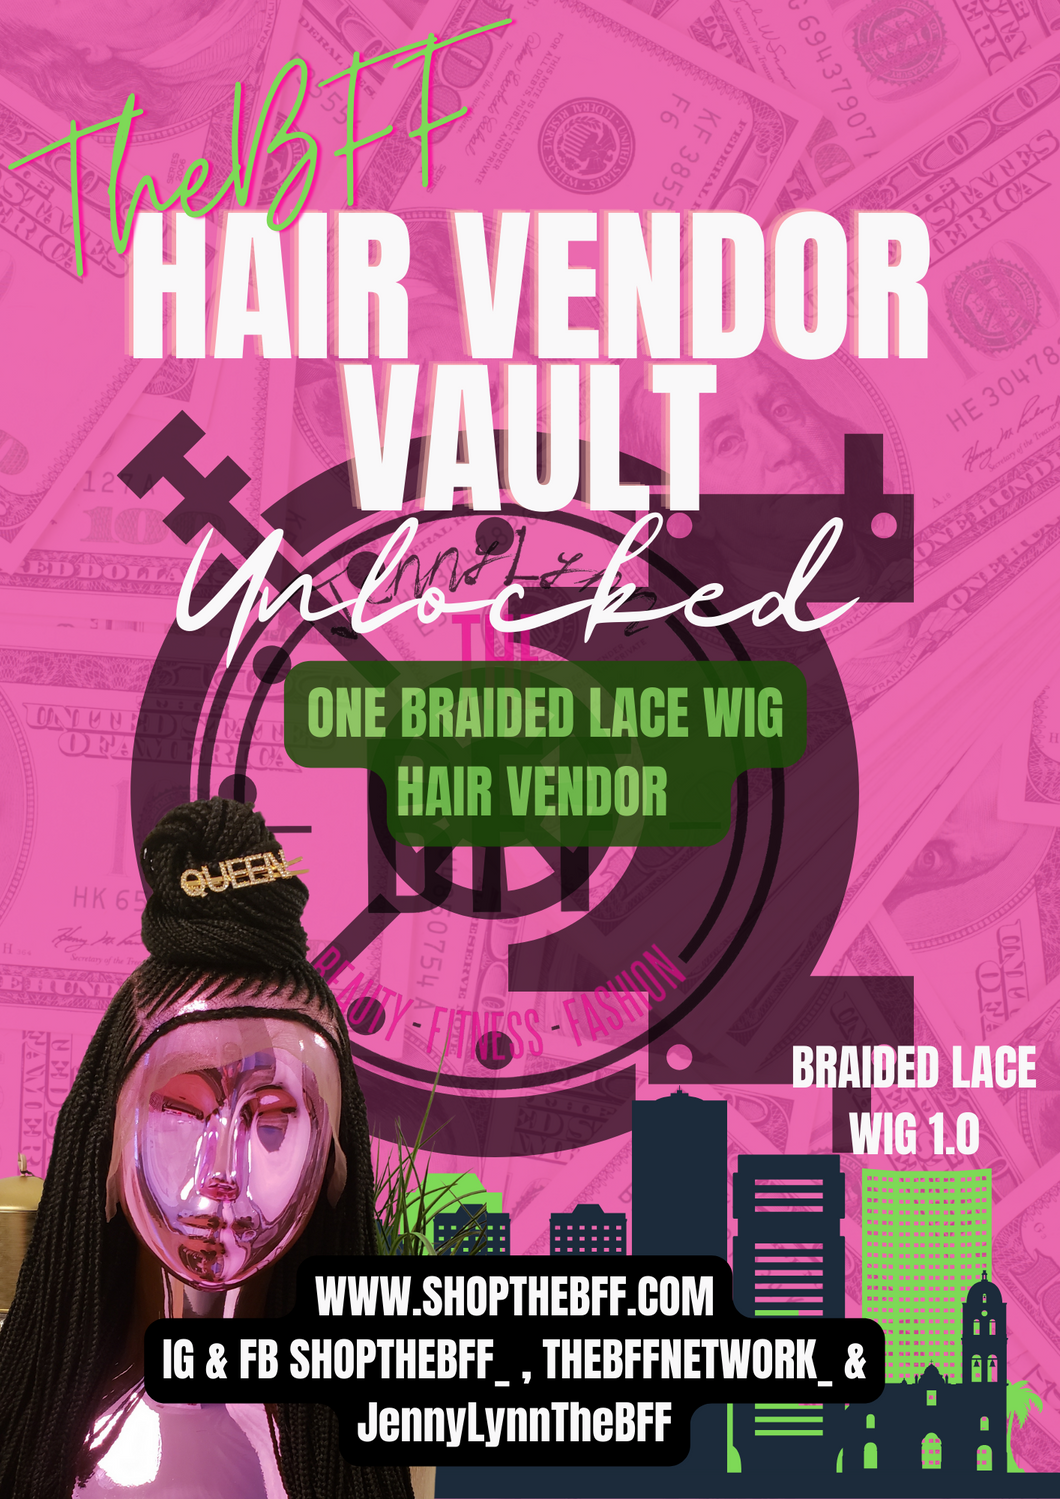 TheBFF Braided Lace Wig Vendor Vault 1.0 Edition